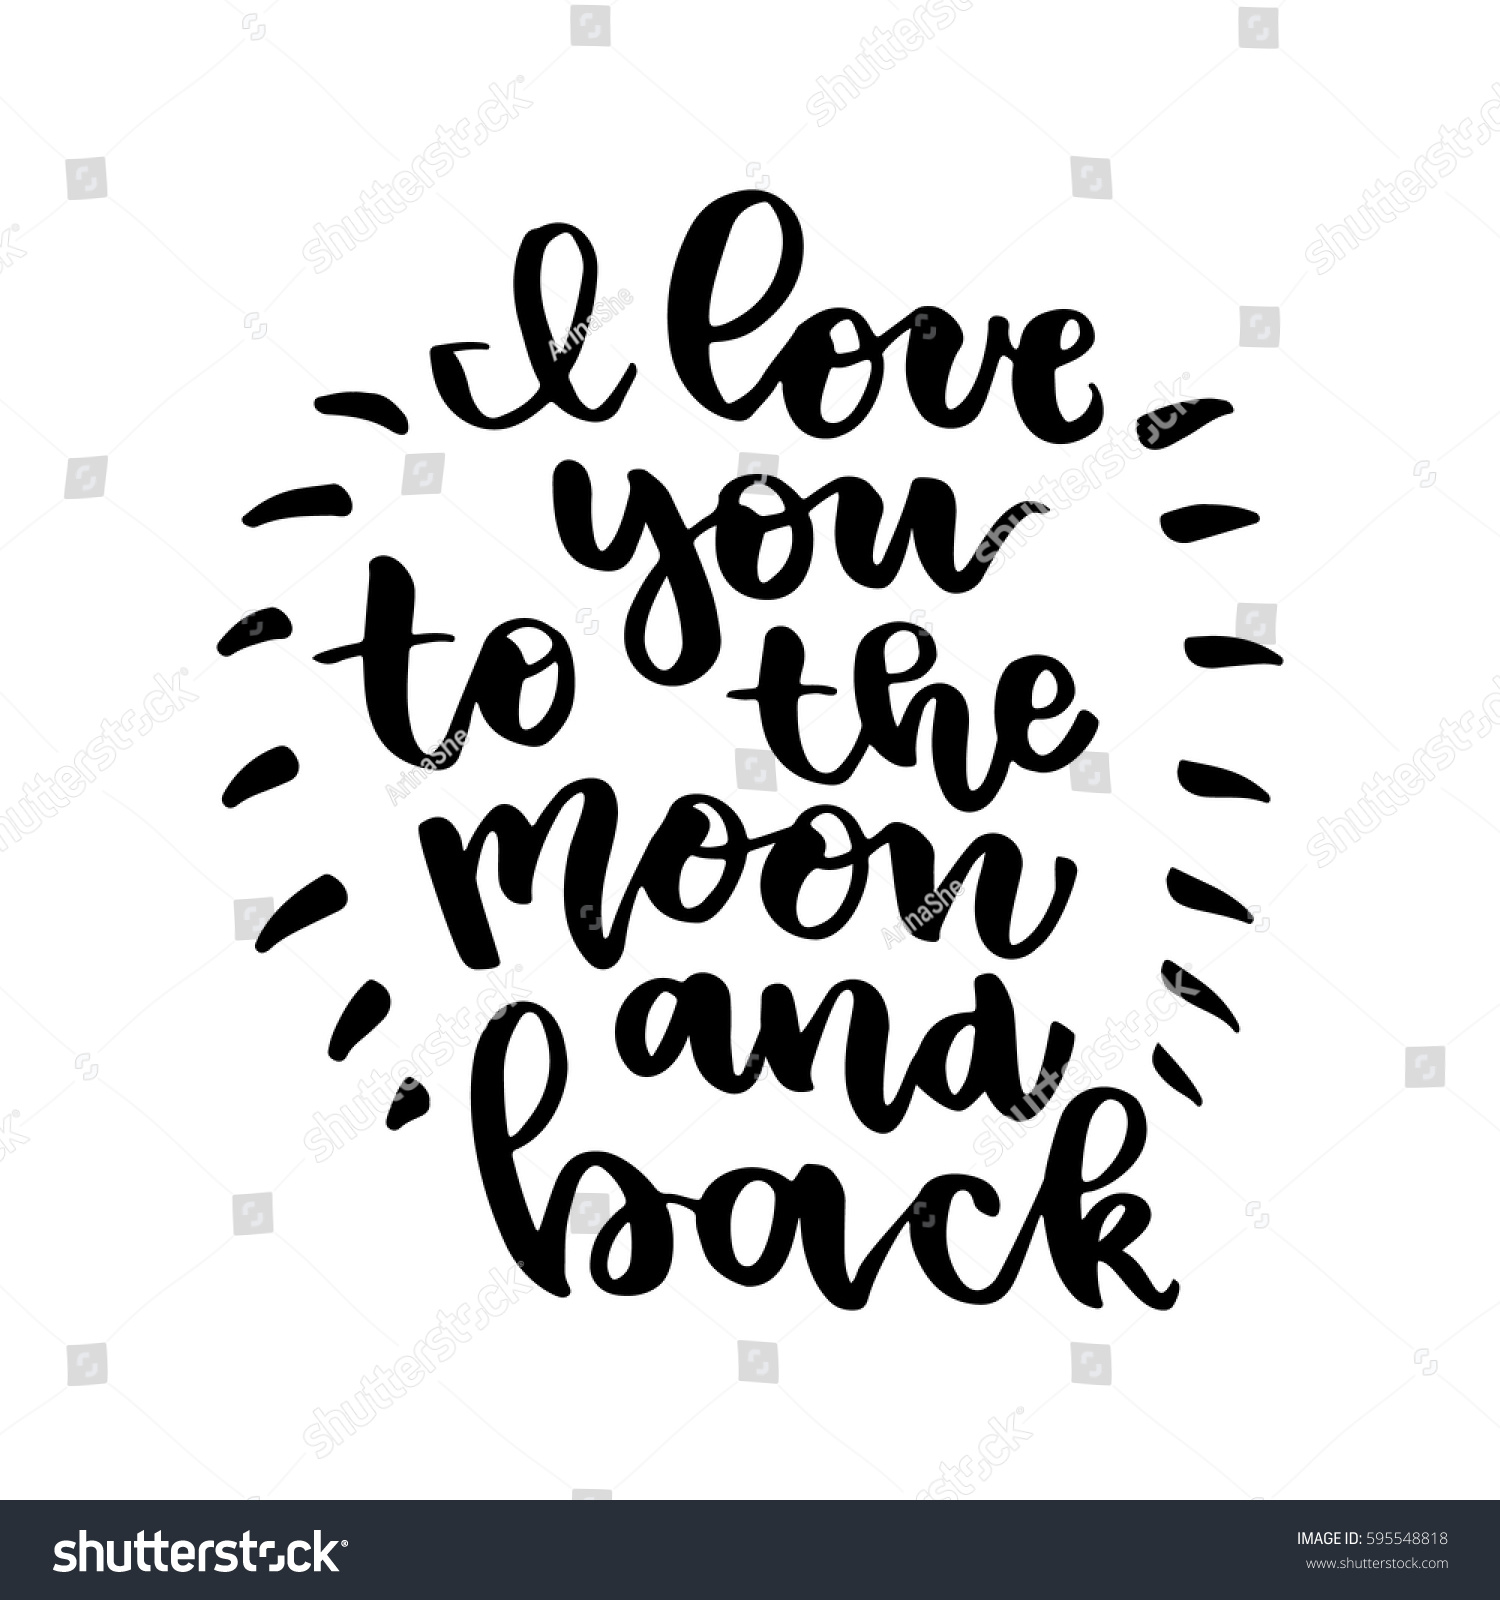 I love you to the moon and back Beautiful quote written by hand with a